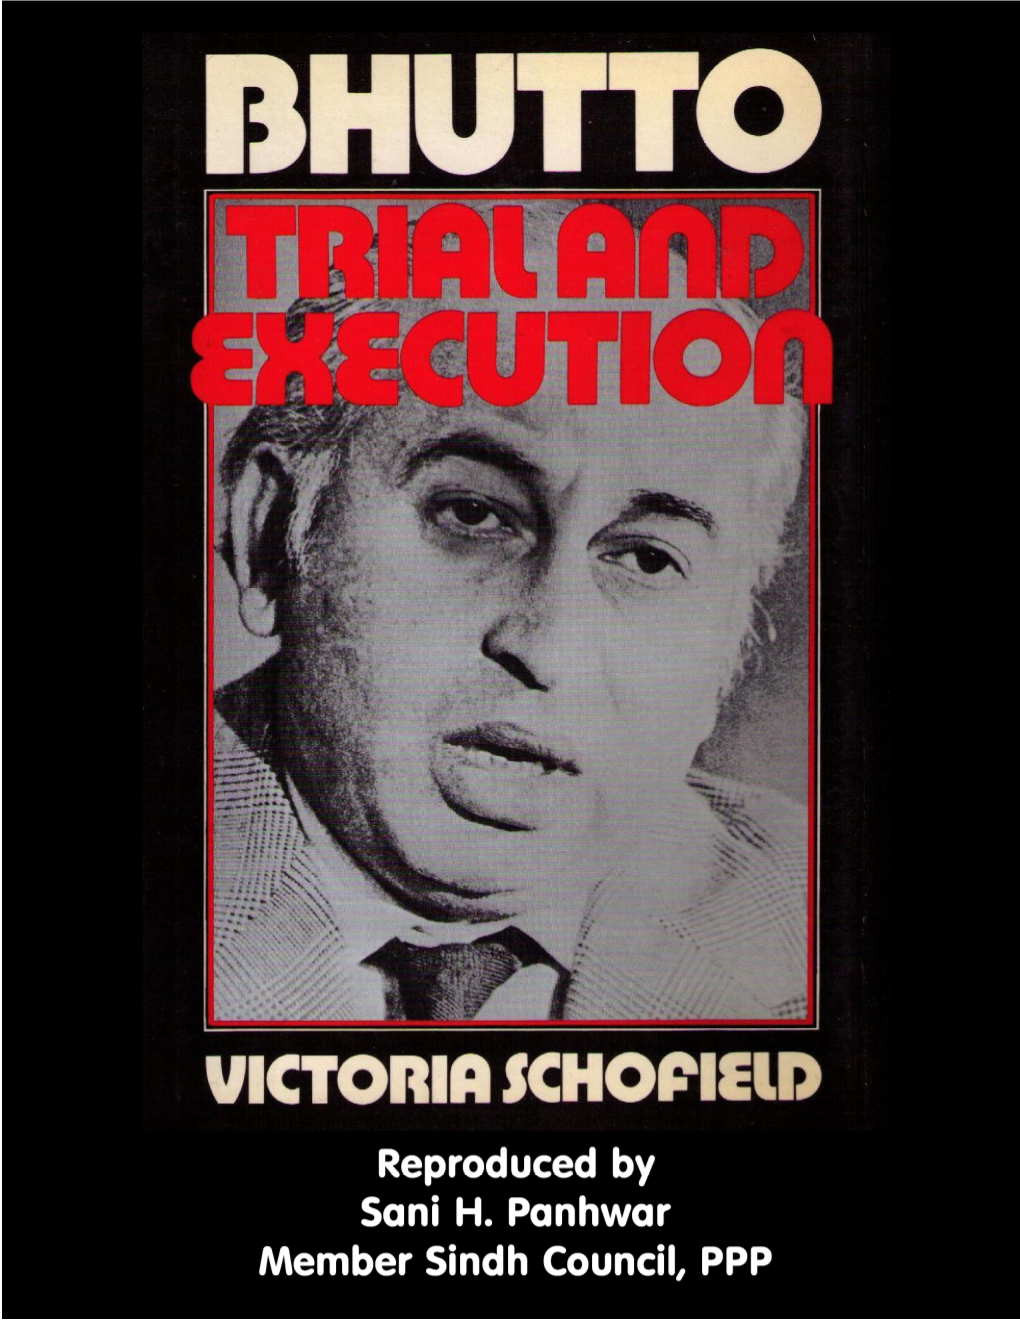 Bhutto Trial and Execution, by Victoria Schofield